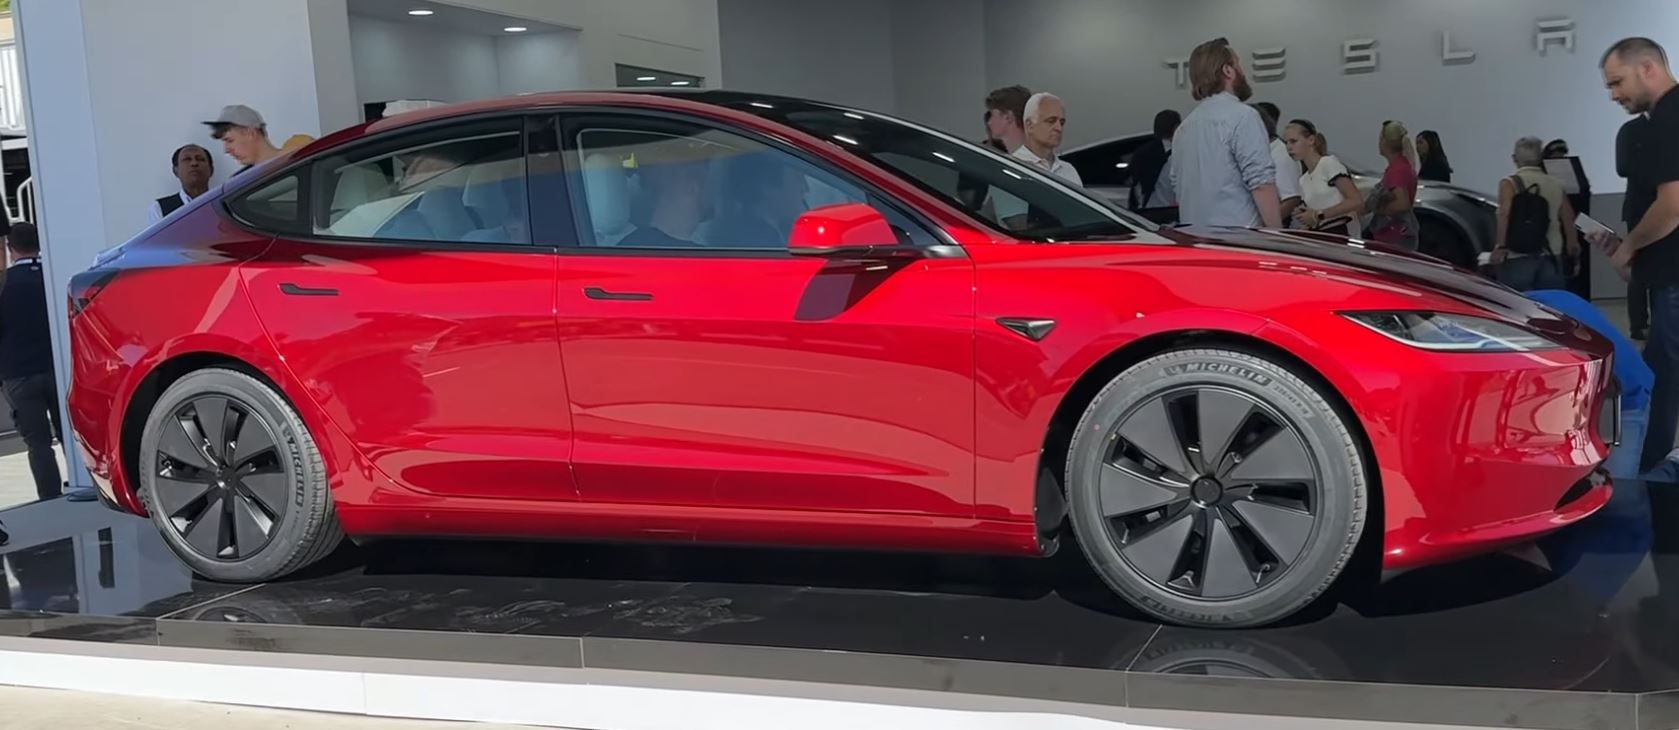 Some early Tesla Model 3 Highland owners aren't very happy with